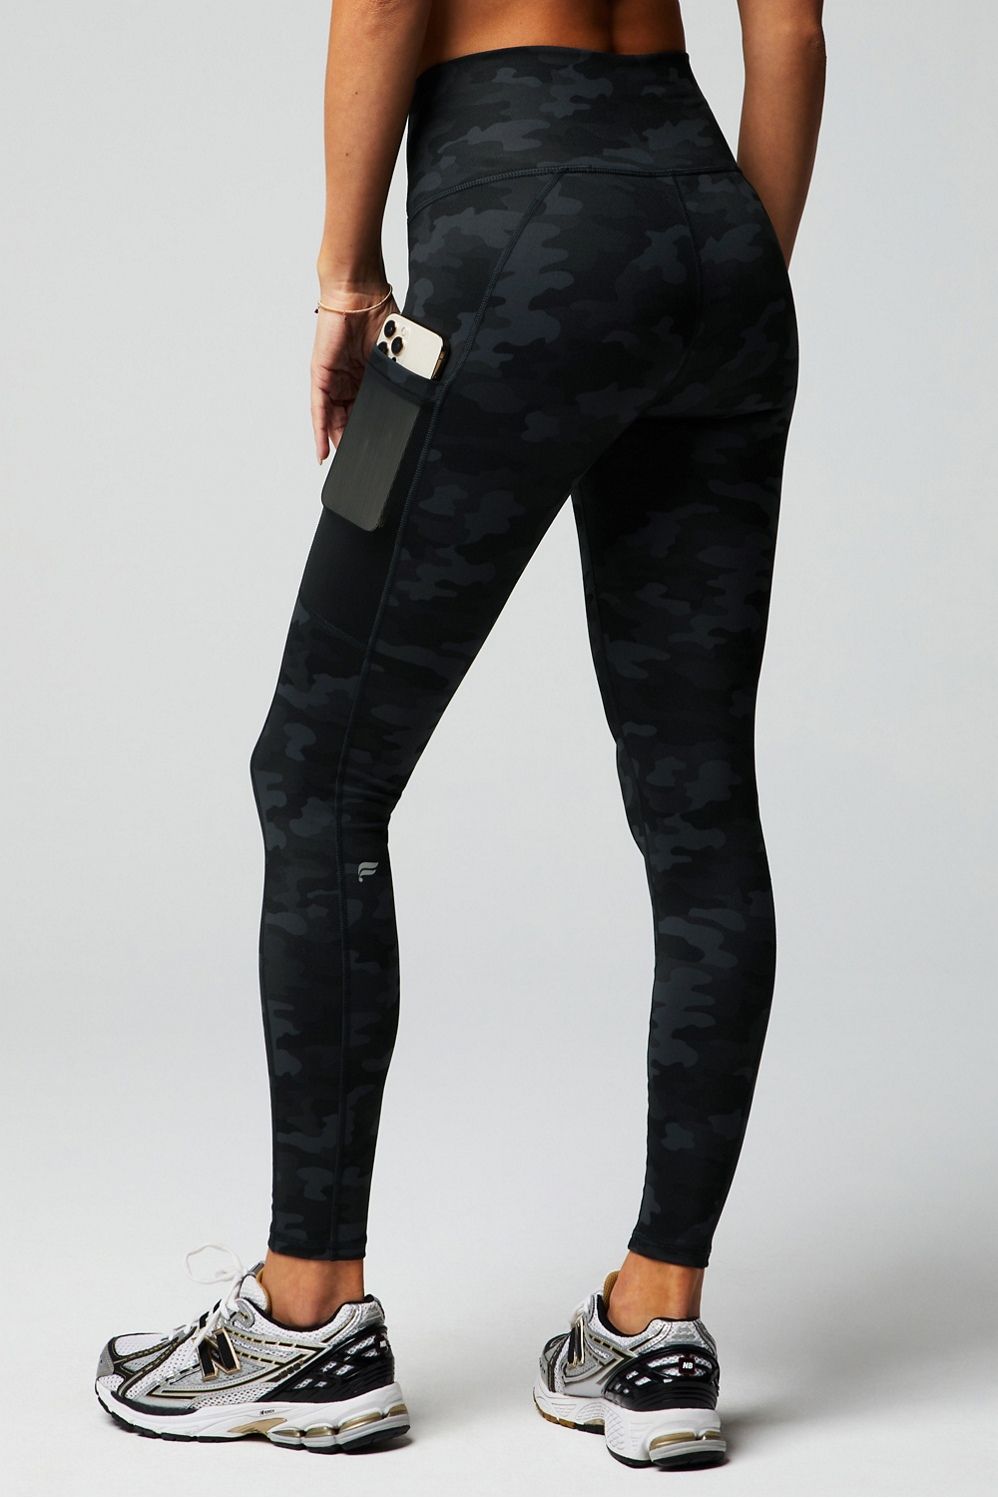 On-The-Go Powerhold® High-Waisted Legging | Fabletics - North America